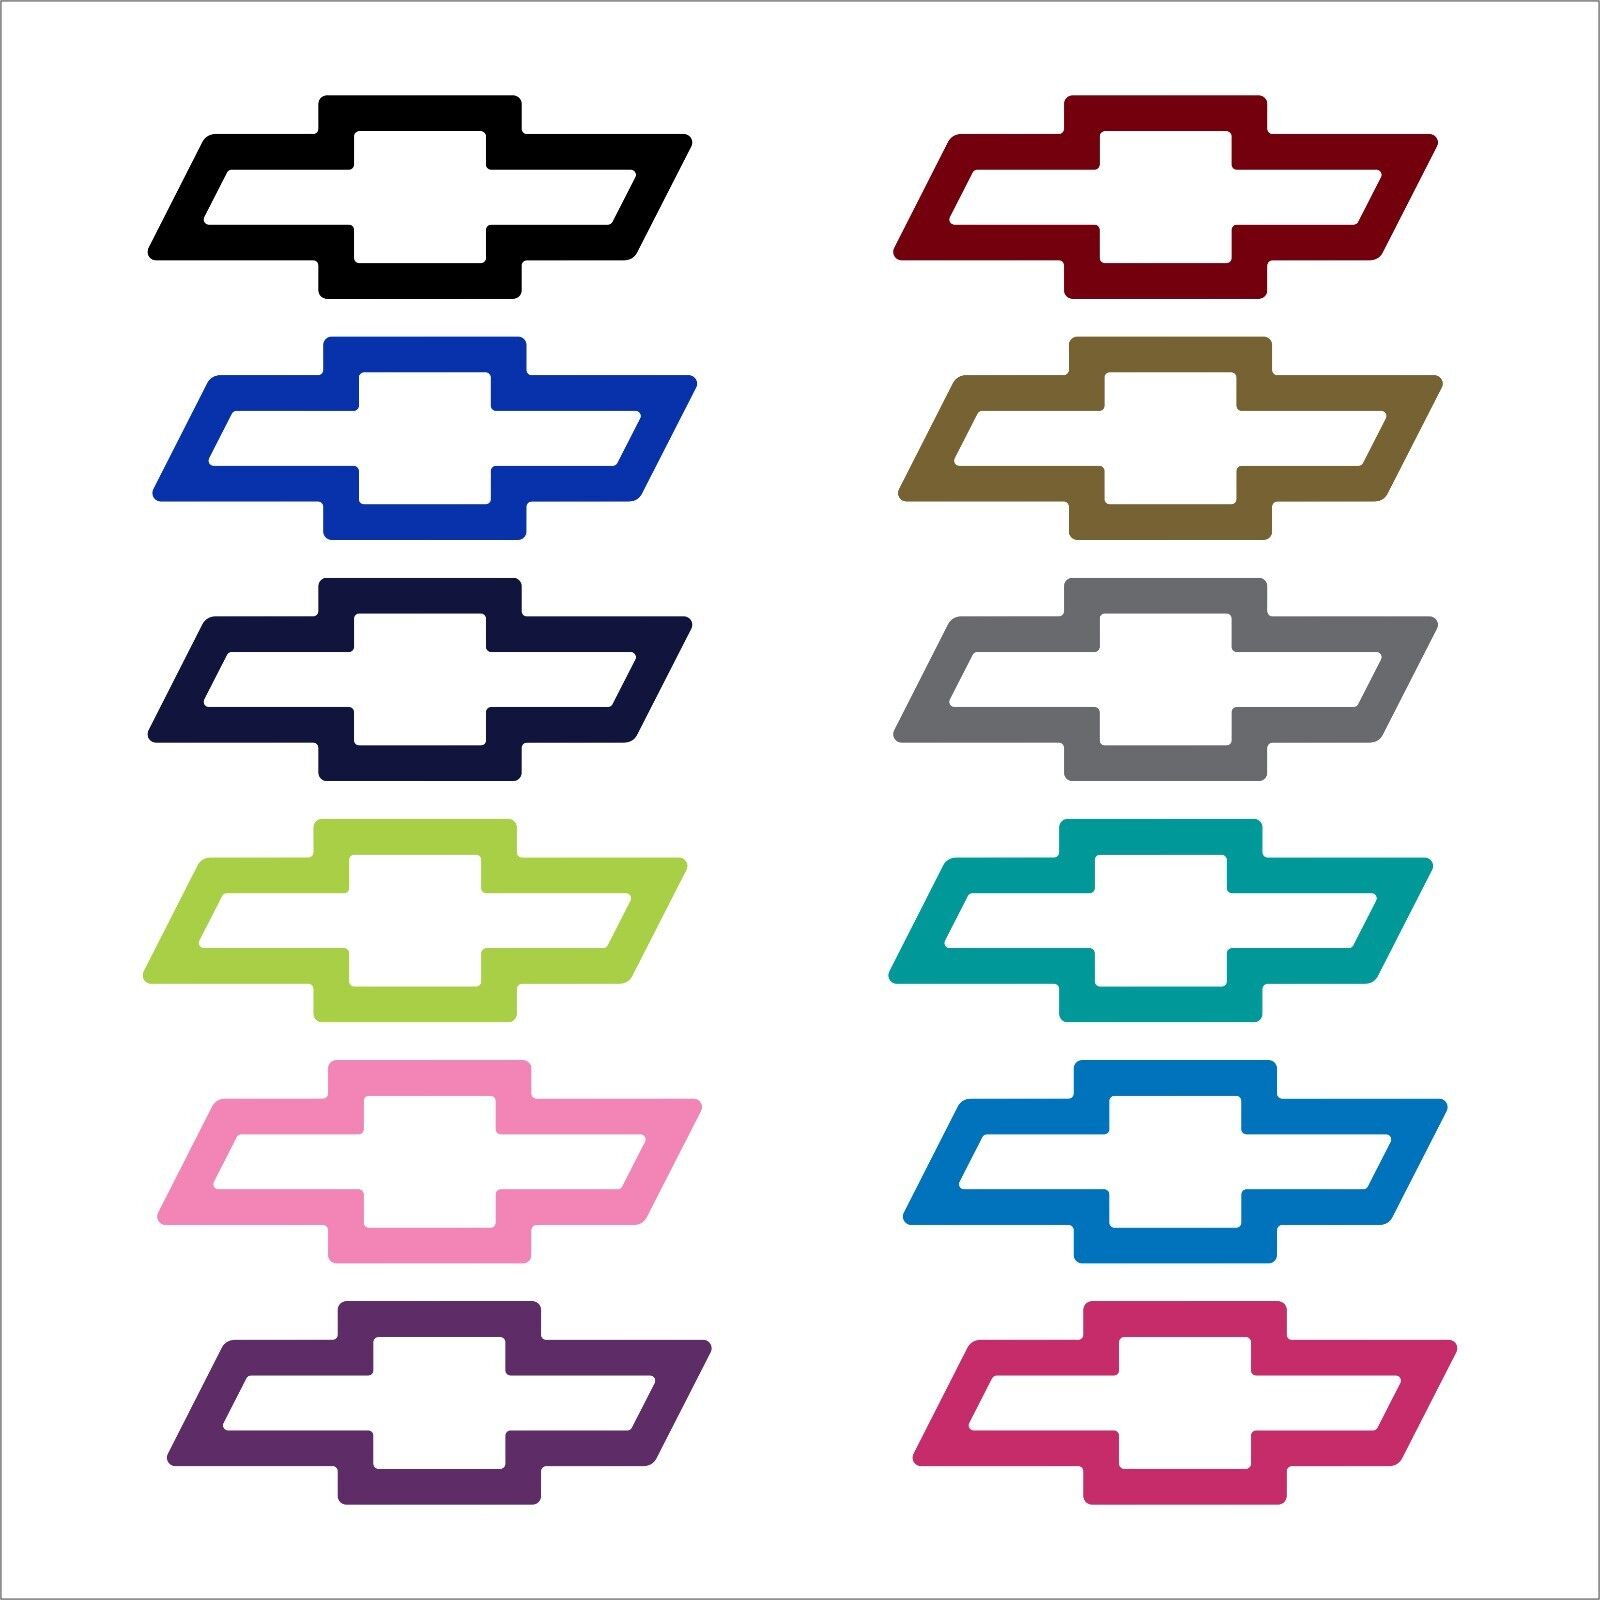 Chevrolet Chevy Bowtie Decal, Many Colors and Sizes Parts for Sale - DragTimes.com Are All Chevy Bowties The Same Size